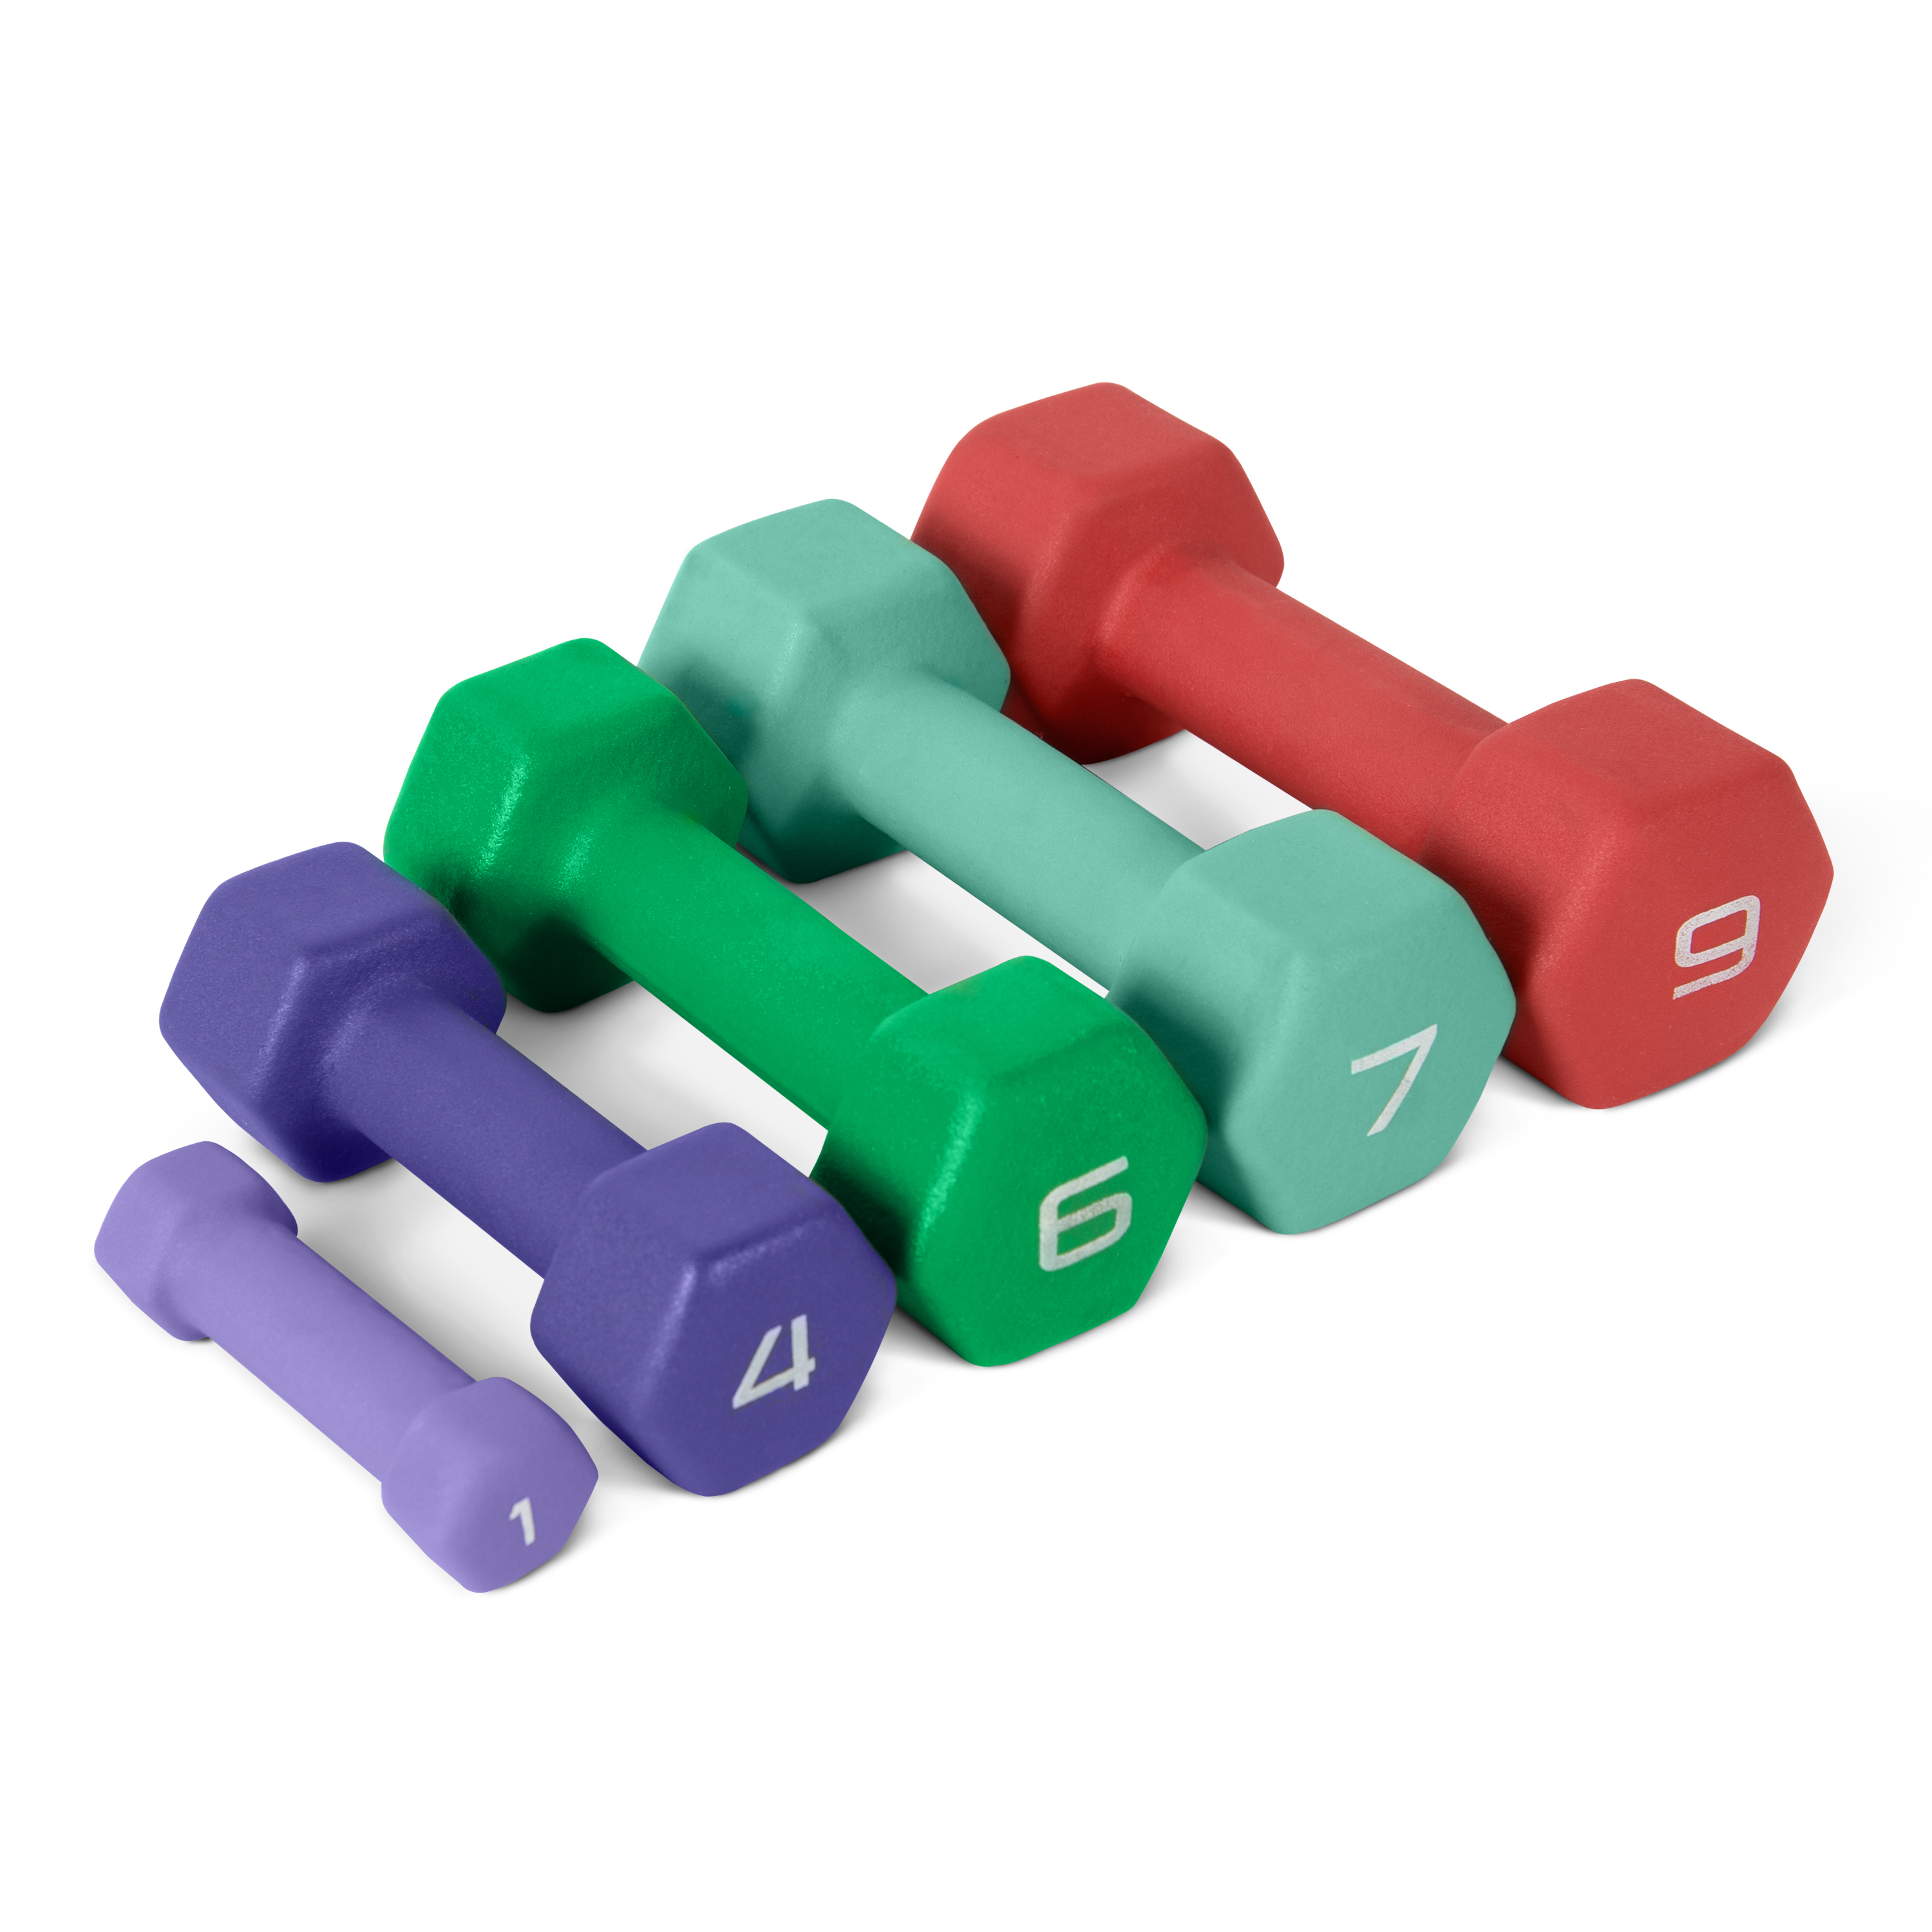 CAP Barbell Neoprene Dumbbell (Available in 1 Lb. - 9 Lbs.), Single - image 1 of 5